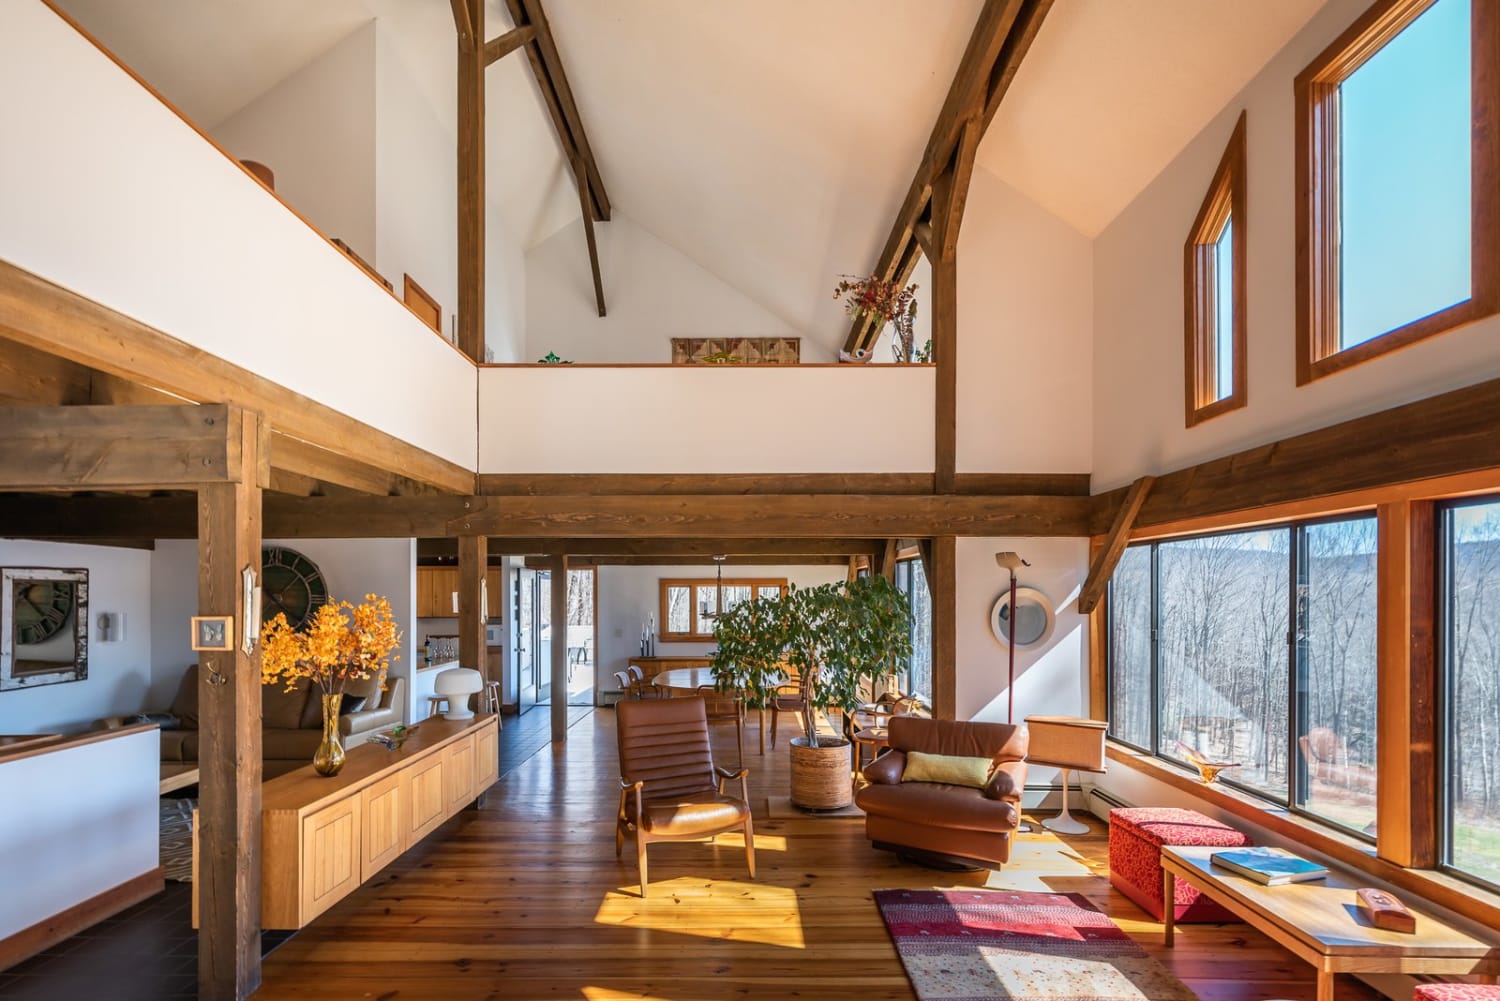 Phantom Tollbooth Author Norton Juster Designed This Home Listed For $429K